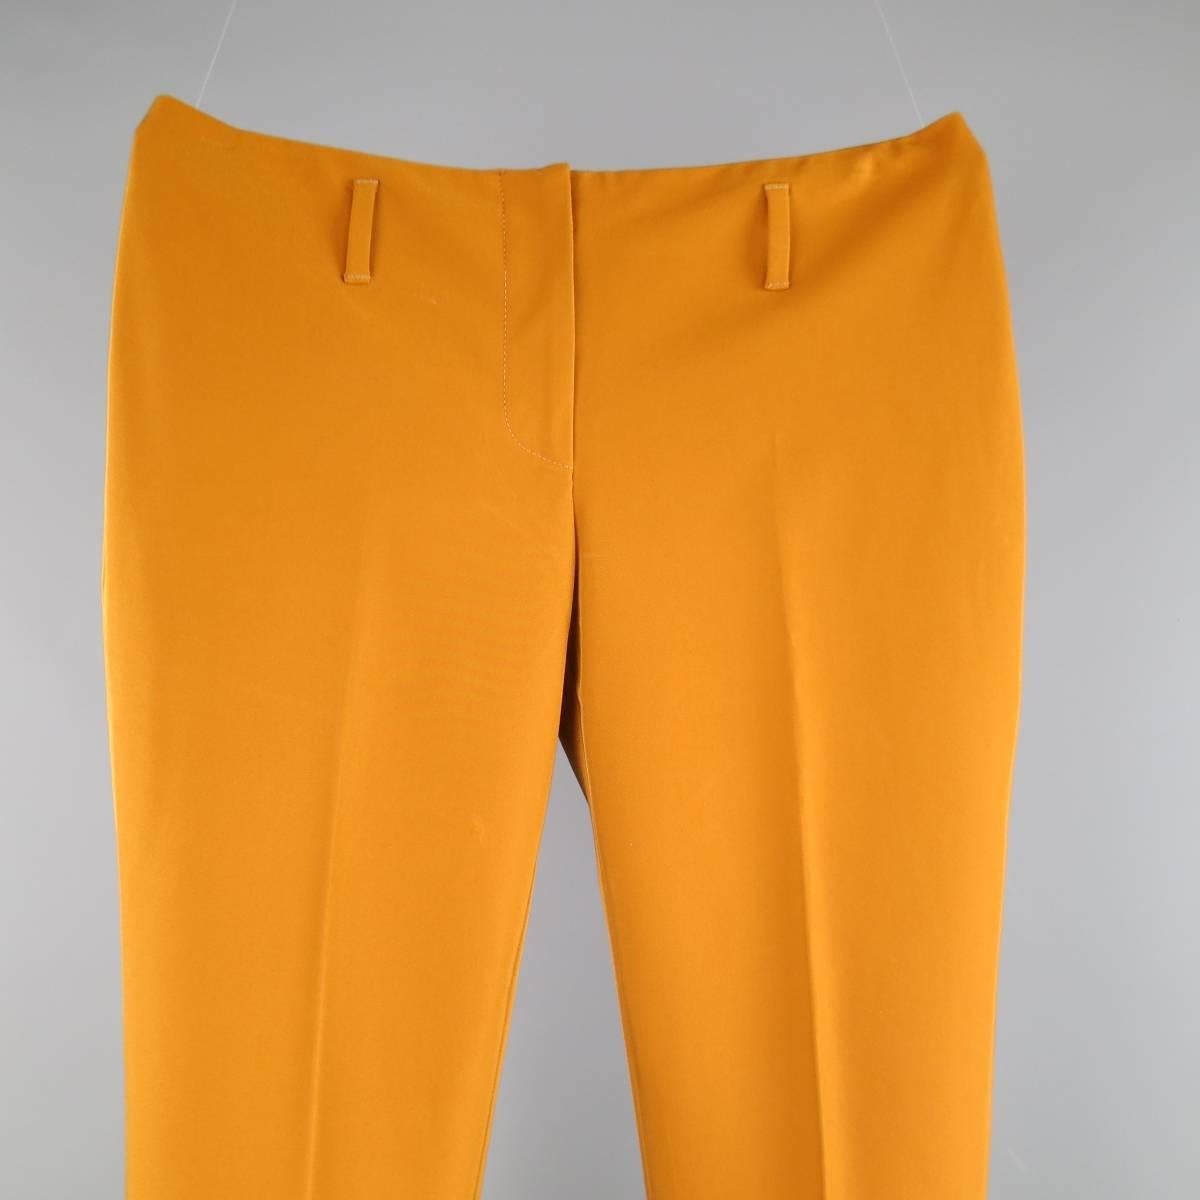 PRADA polyester blend pants in a structured tan stretch polyester twill and feature a low rise with seamless waistband, belt loops, and slightly flared leg. Made in Italy.
 
Excellent Pre-Owed Condition.
Marked: 42 IT
 
Measurements:
 
Waist: 30